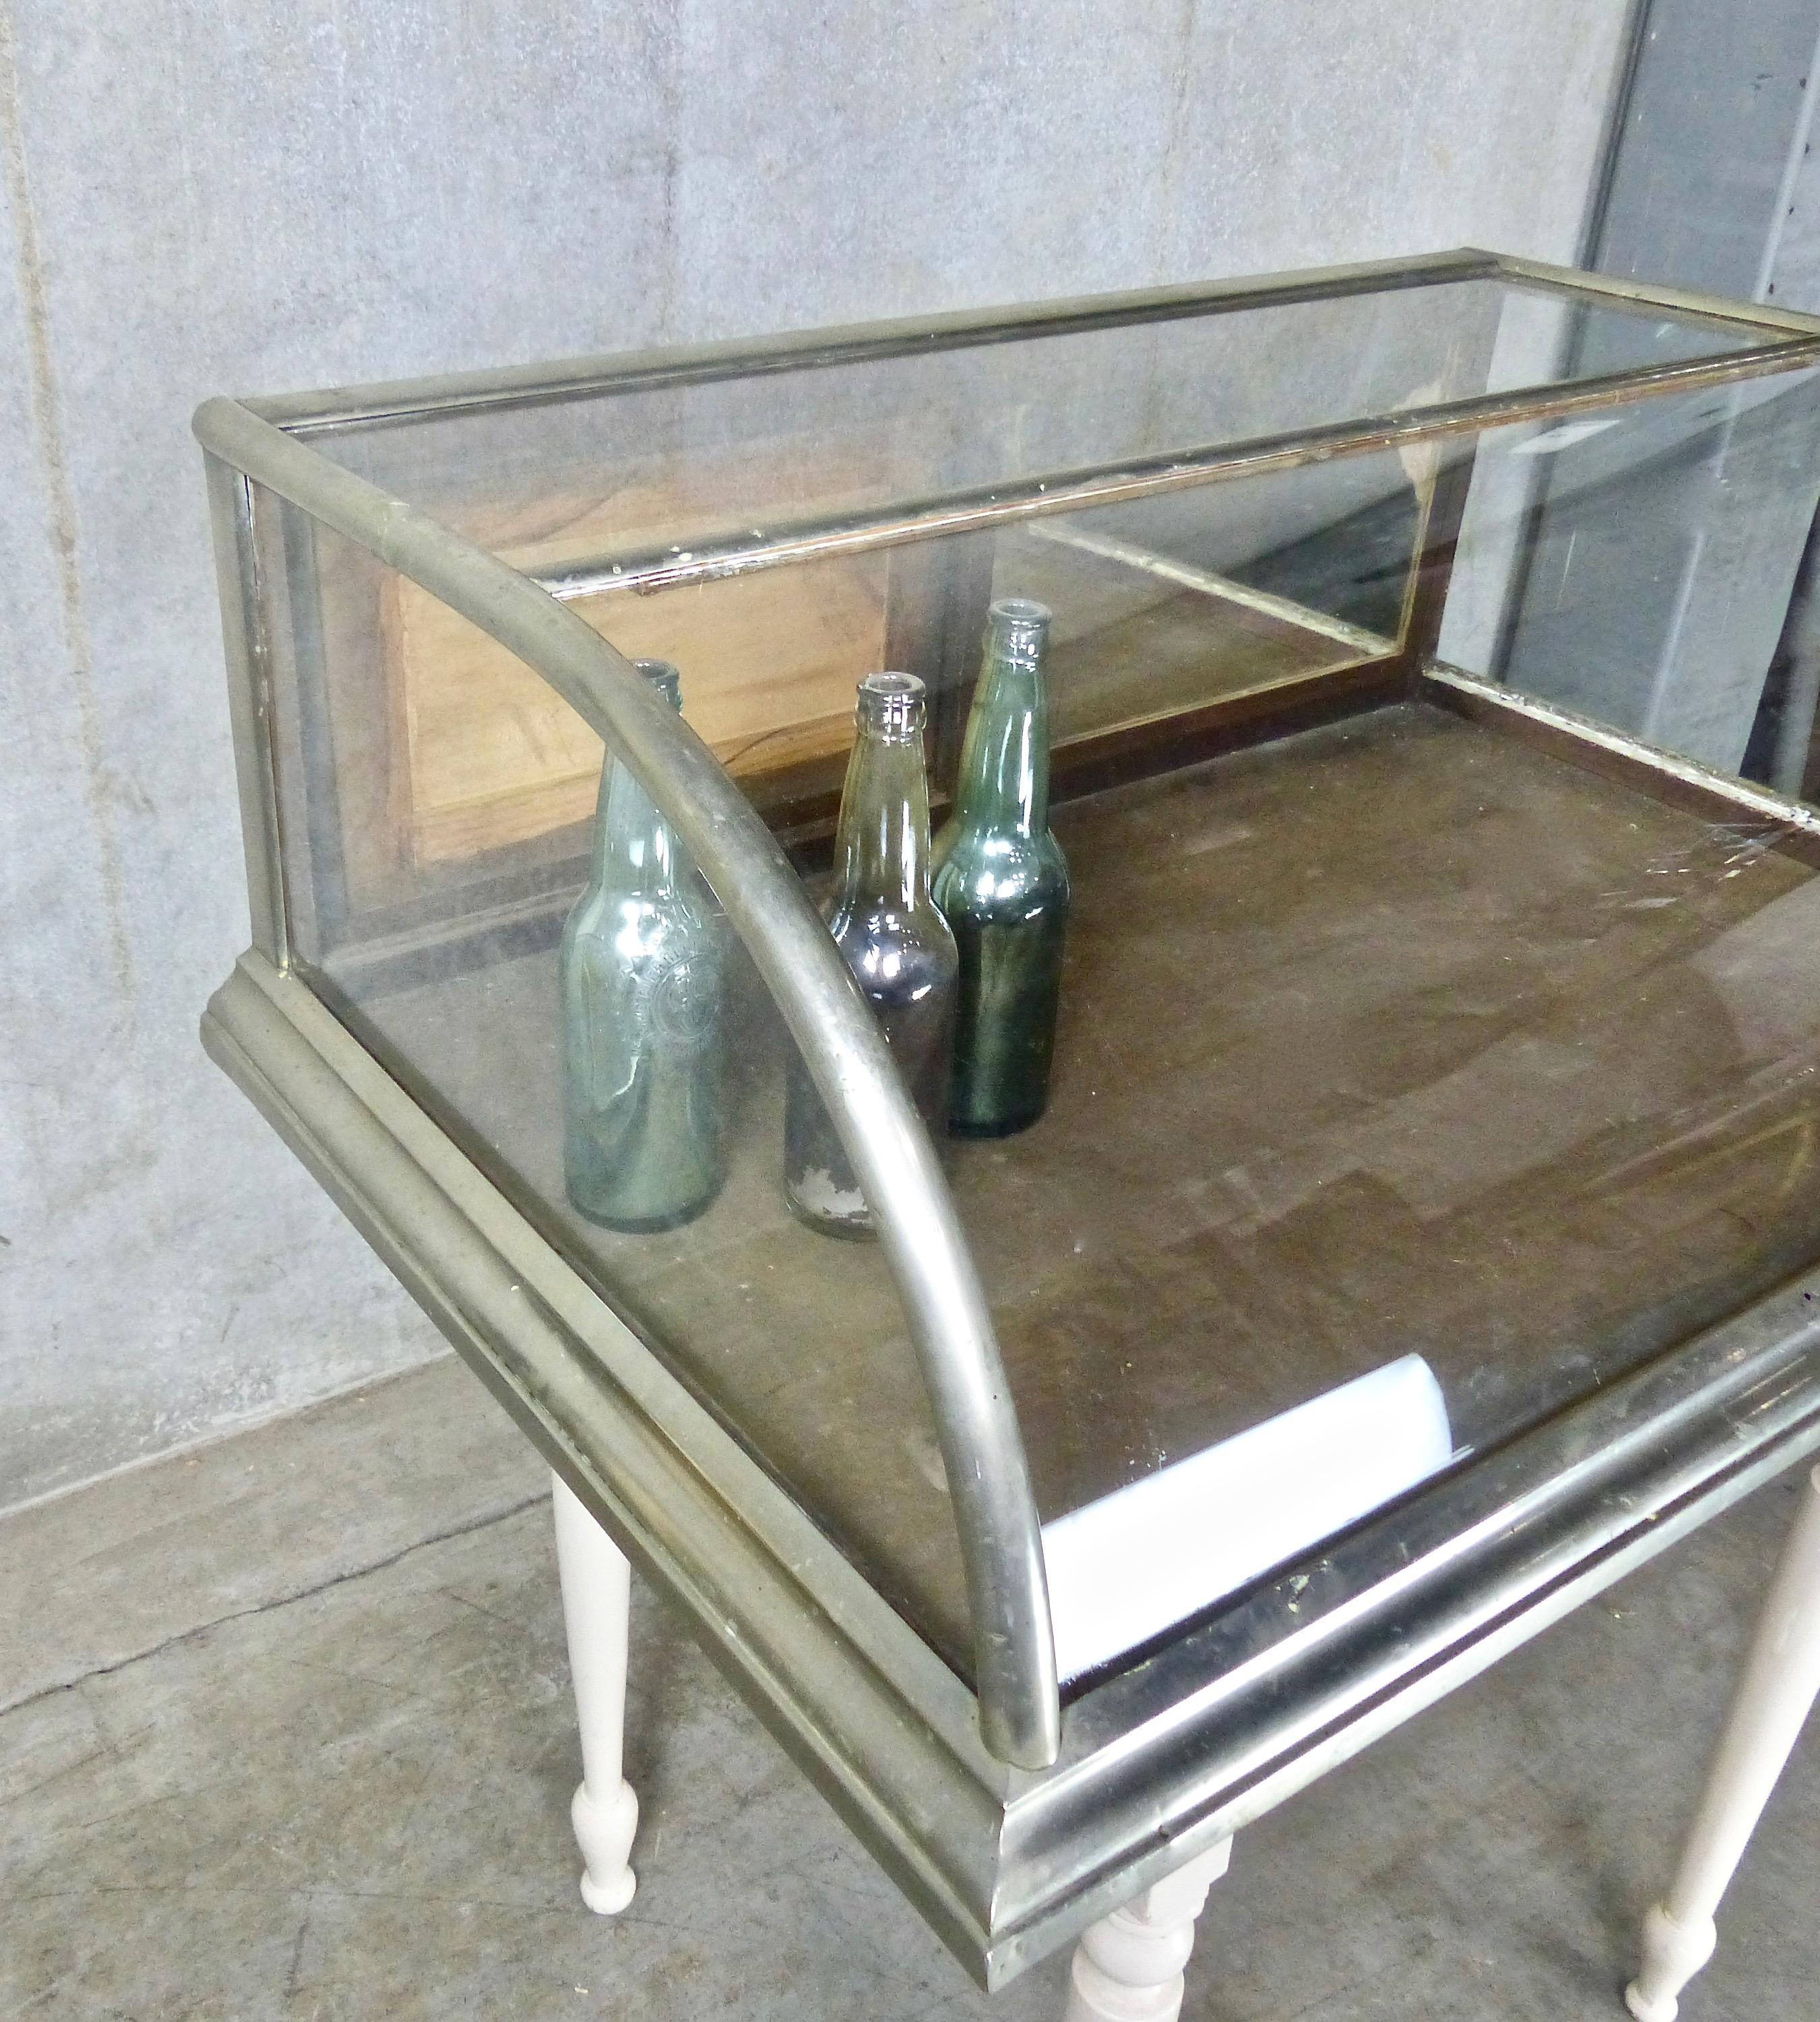 A rare, compact-sized mercantile display case in original curved glass by Dominion Showcase Works of Toronto. Designed as a countertop display/merchandising case, it features sliding wooden doors in the rear.
Dimensions 12” H x 33” W x 24”